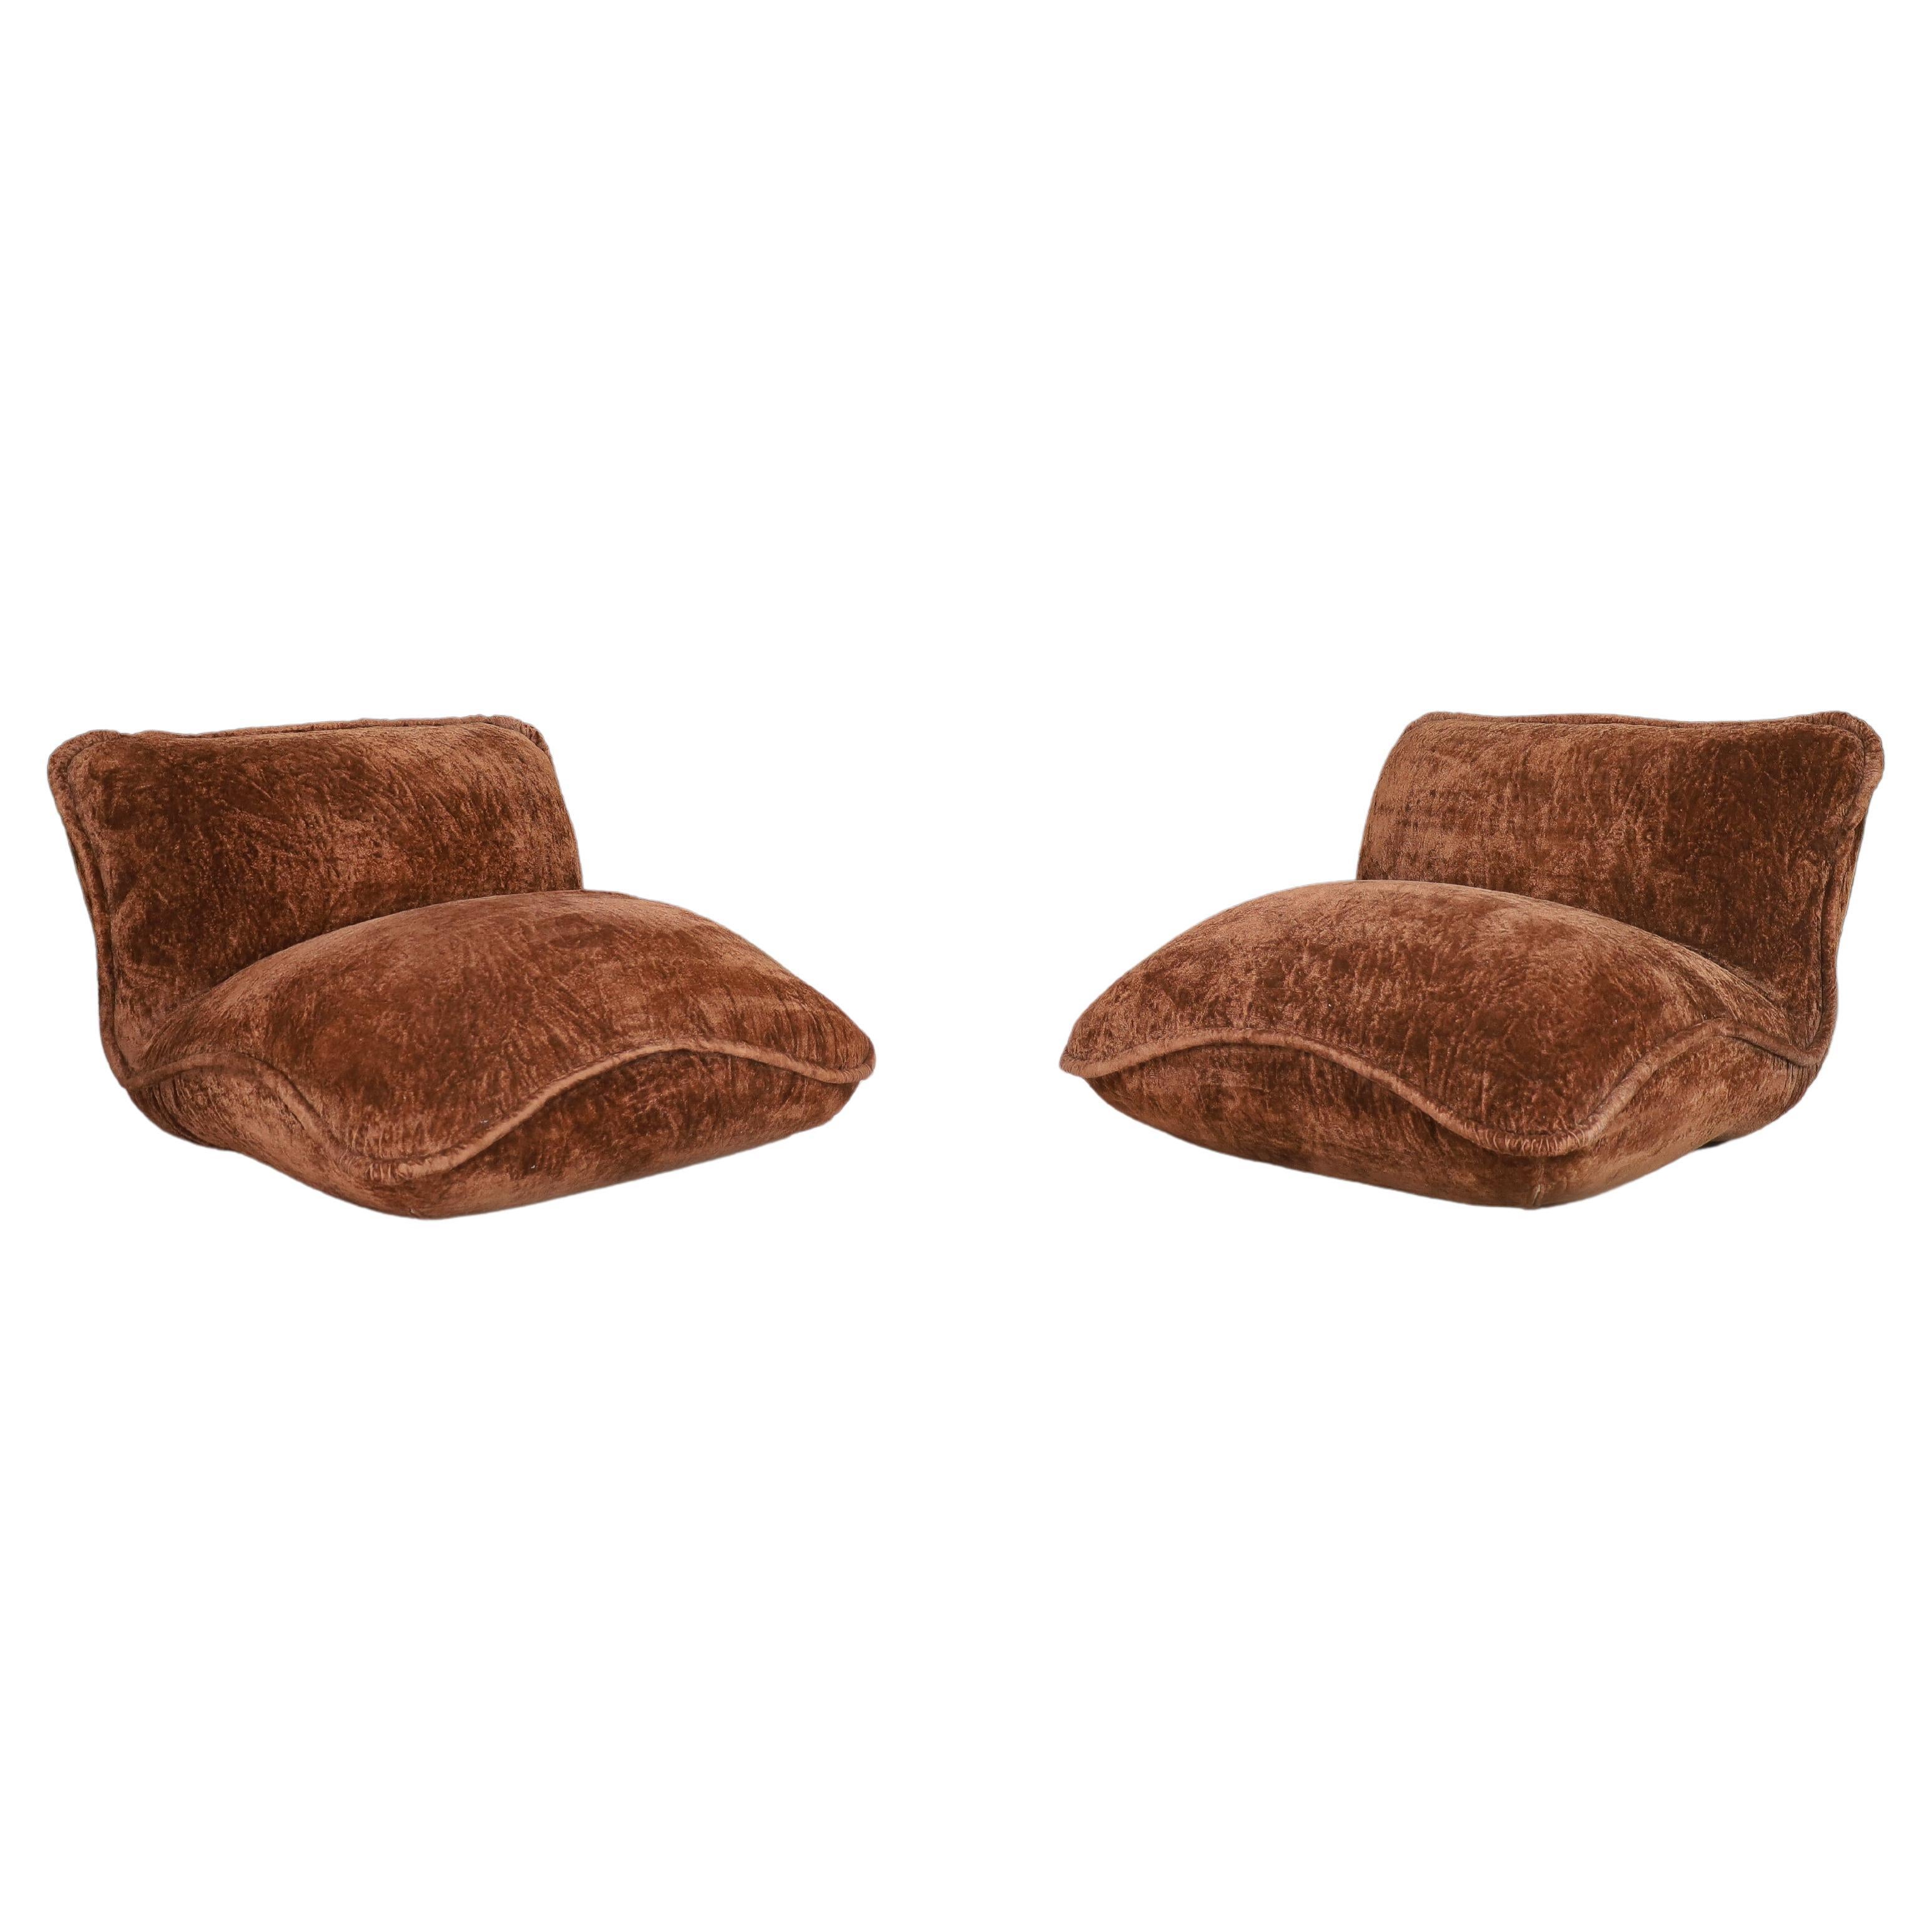 Set of 2 "Gena" Lounge Chairs by Claudio Vagnoni for 1P Italy, 1969 For Sale